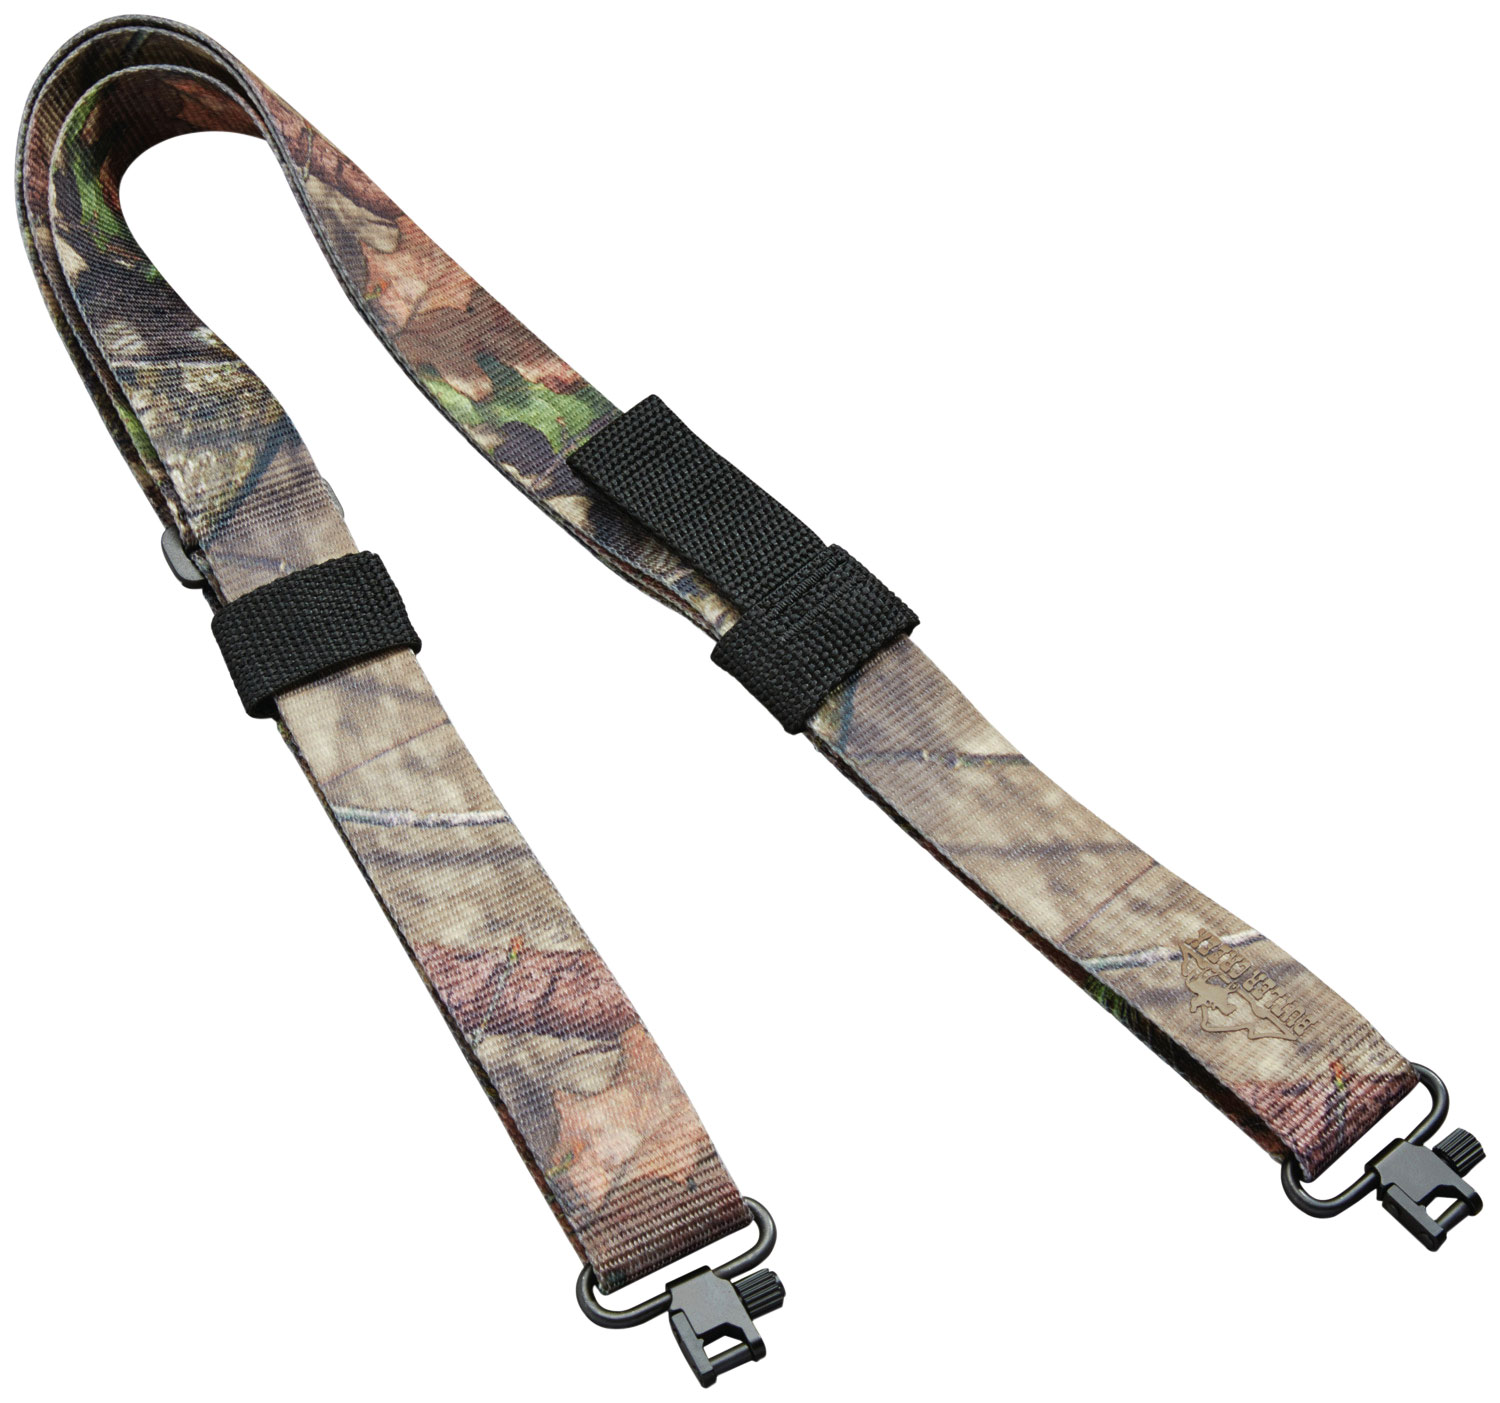 Butler Creek 180092 Quick Carry Sling made of Mossy Oak Break-Up Nylon Webbing with 27